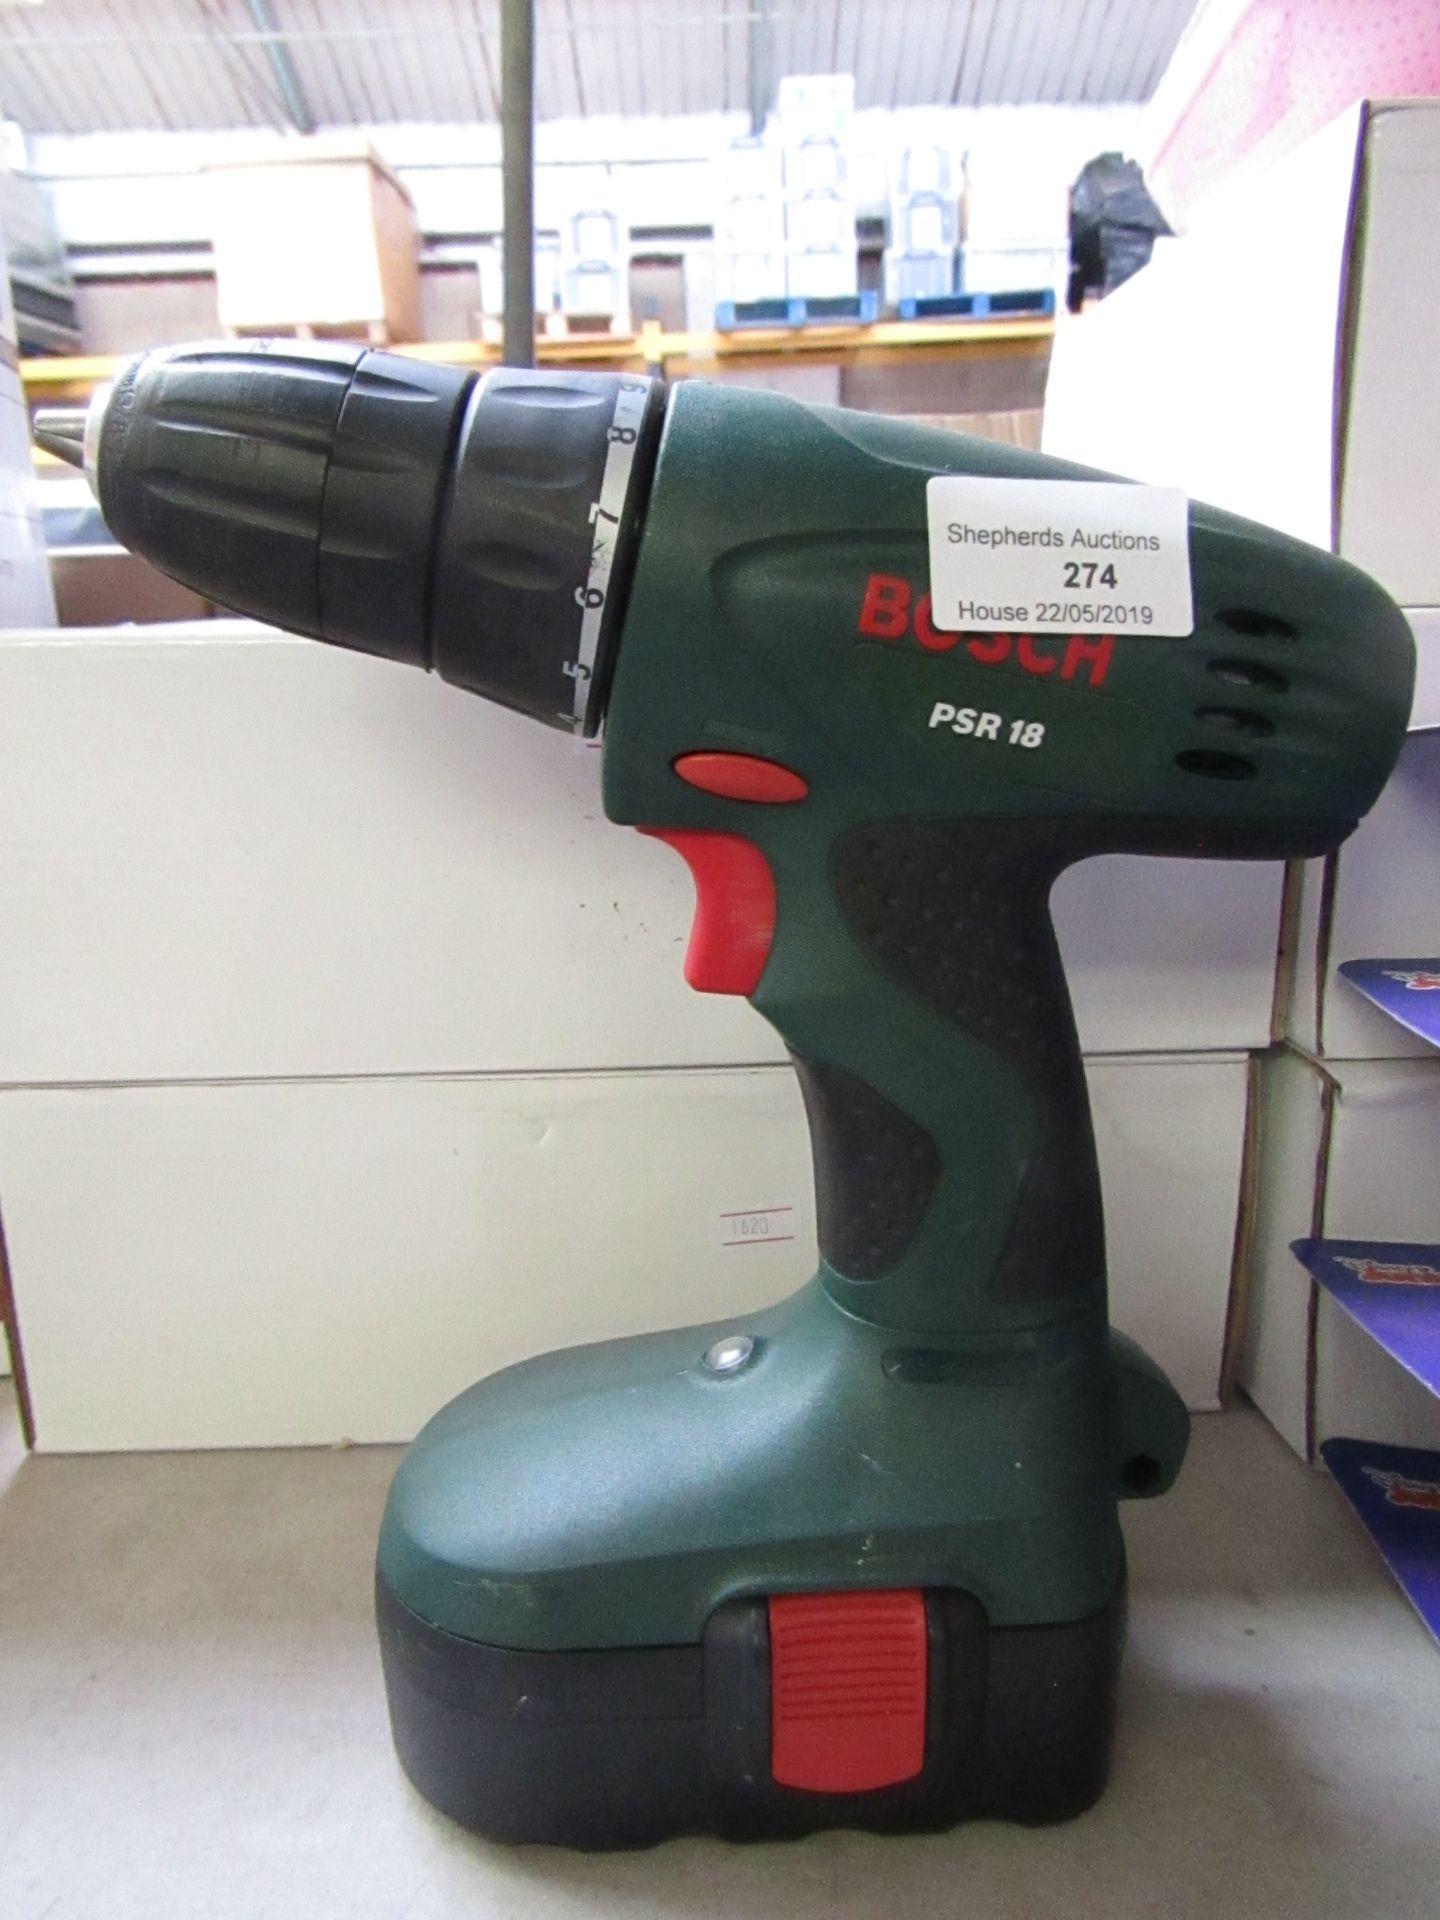 Bosch PSR18 cordless drill, tested working with battery but no charger.